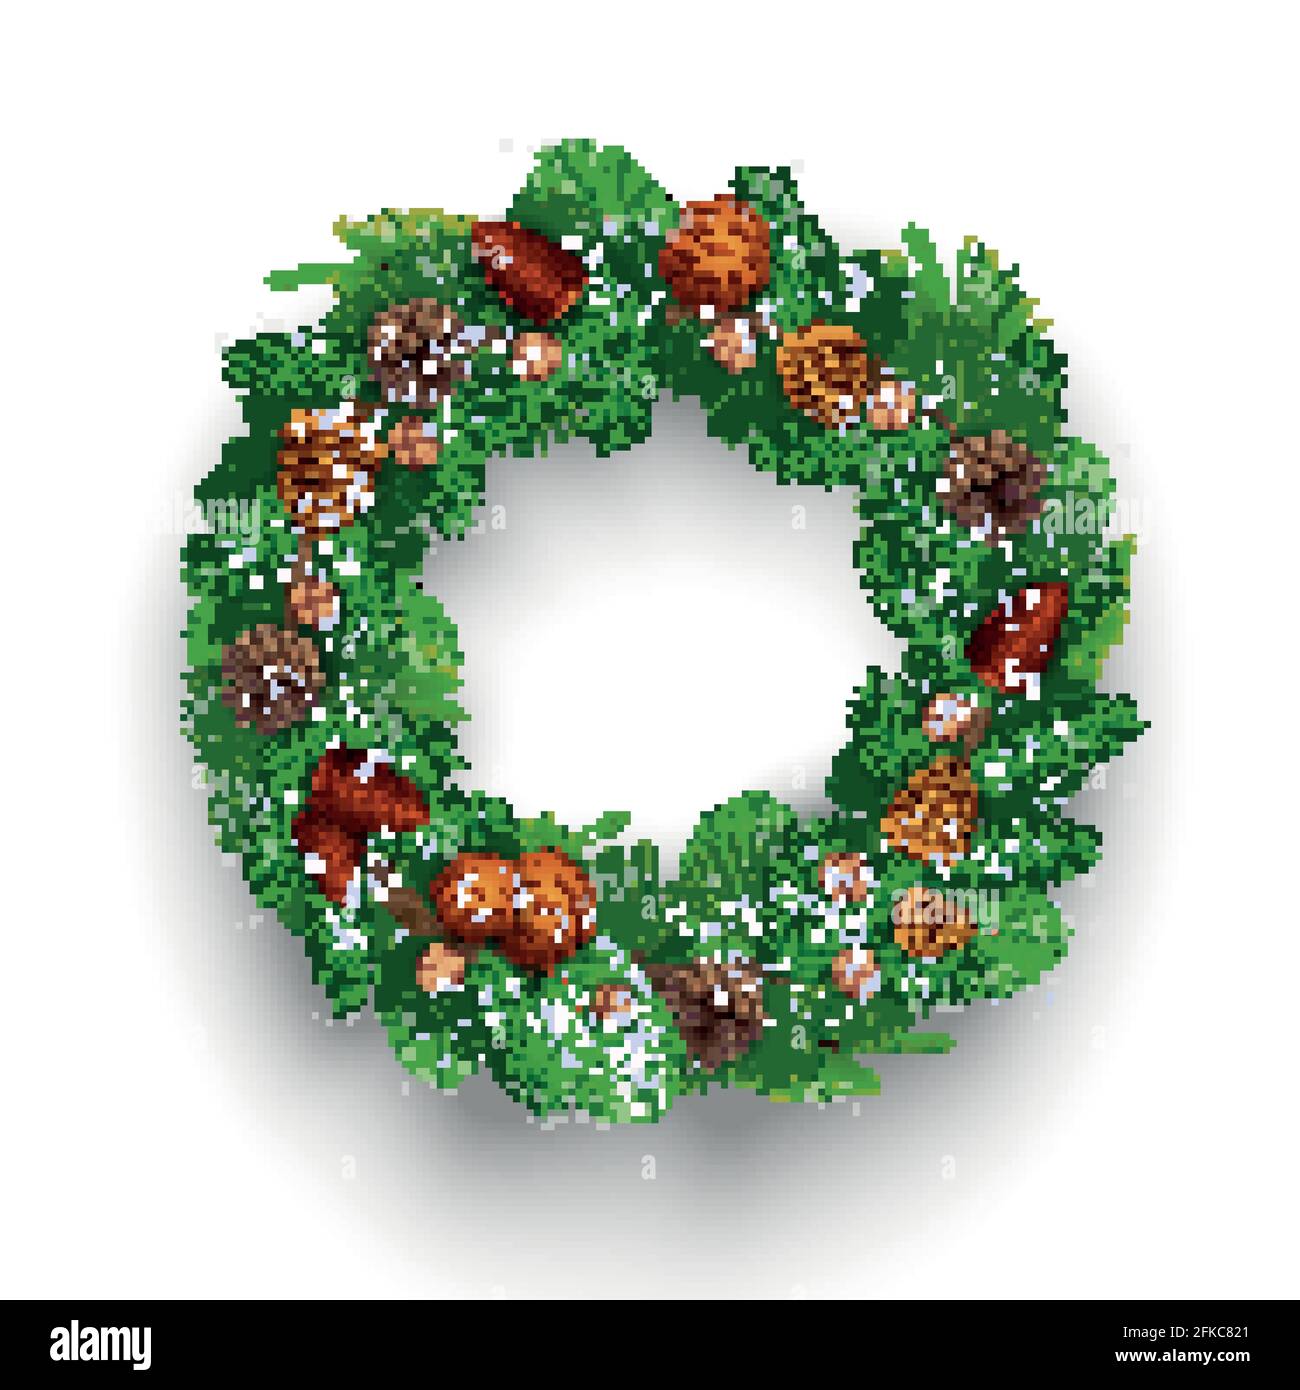 Fir christmas wreath composition with isolated image of circle shaped garland with cones and fresh needle vector illustration Stock Vector